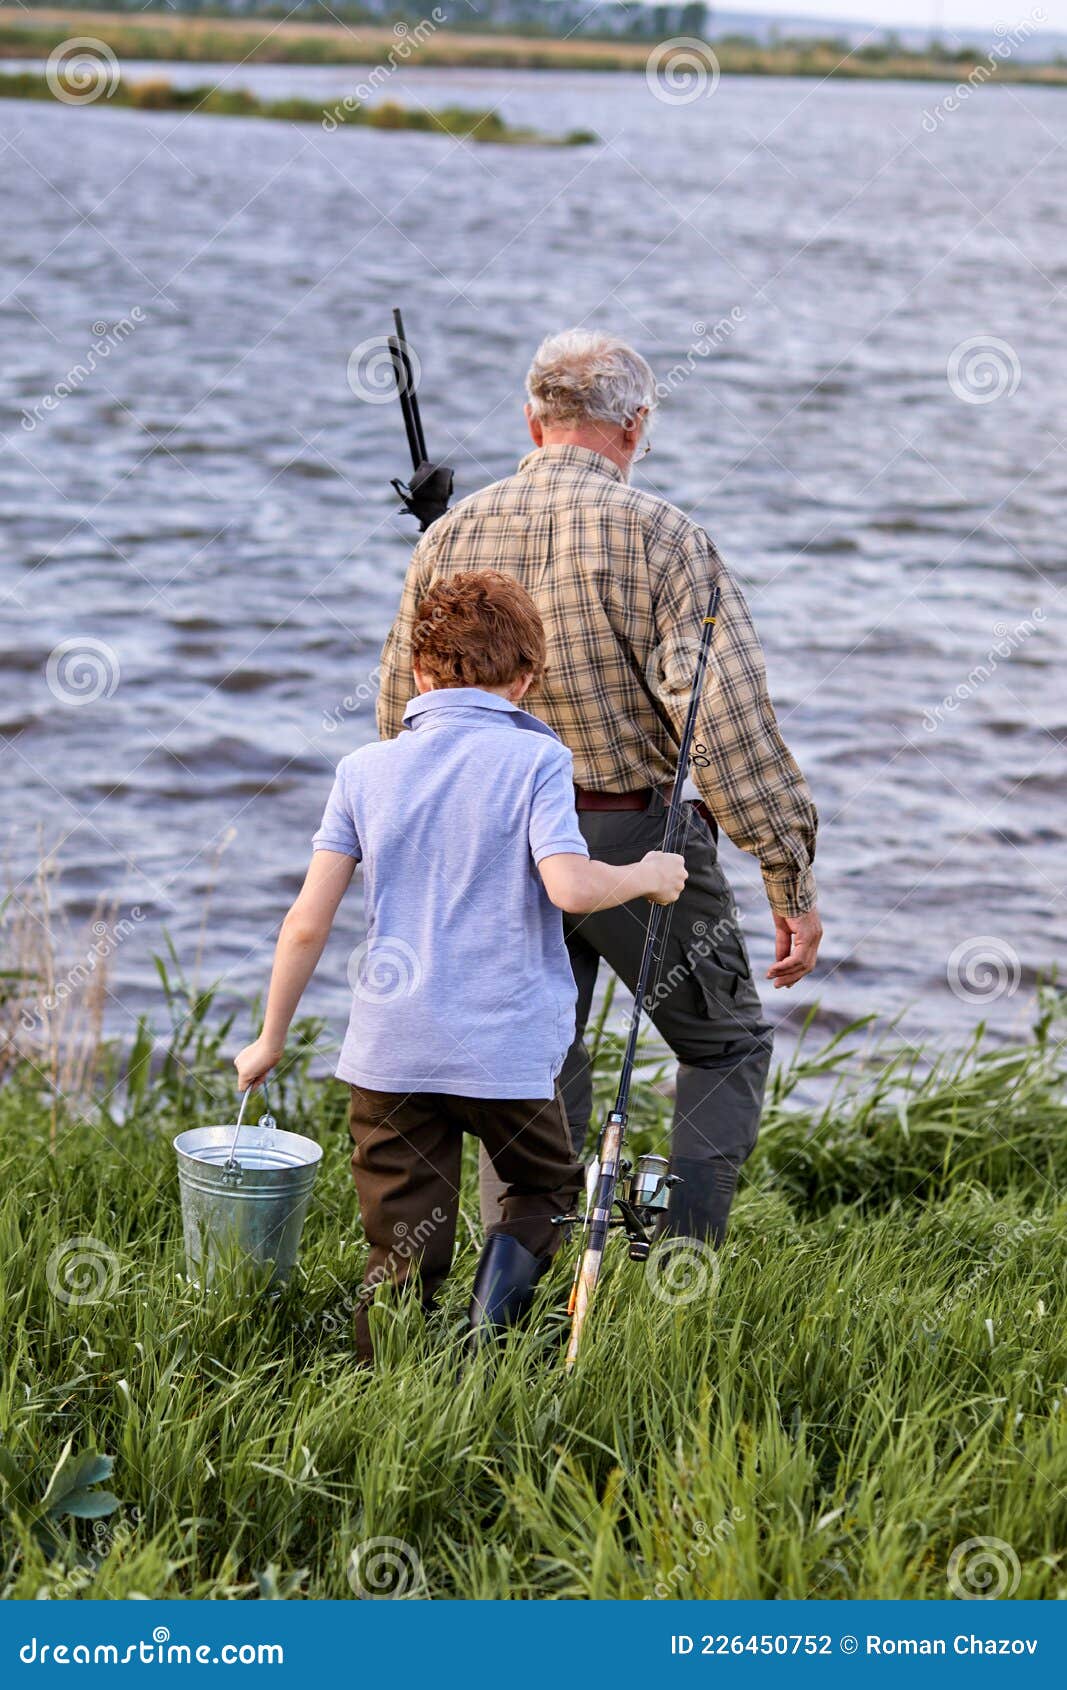 Grandfather and Grandson Going Fishing. Grandfather and Grandson